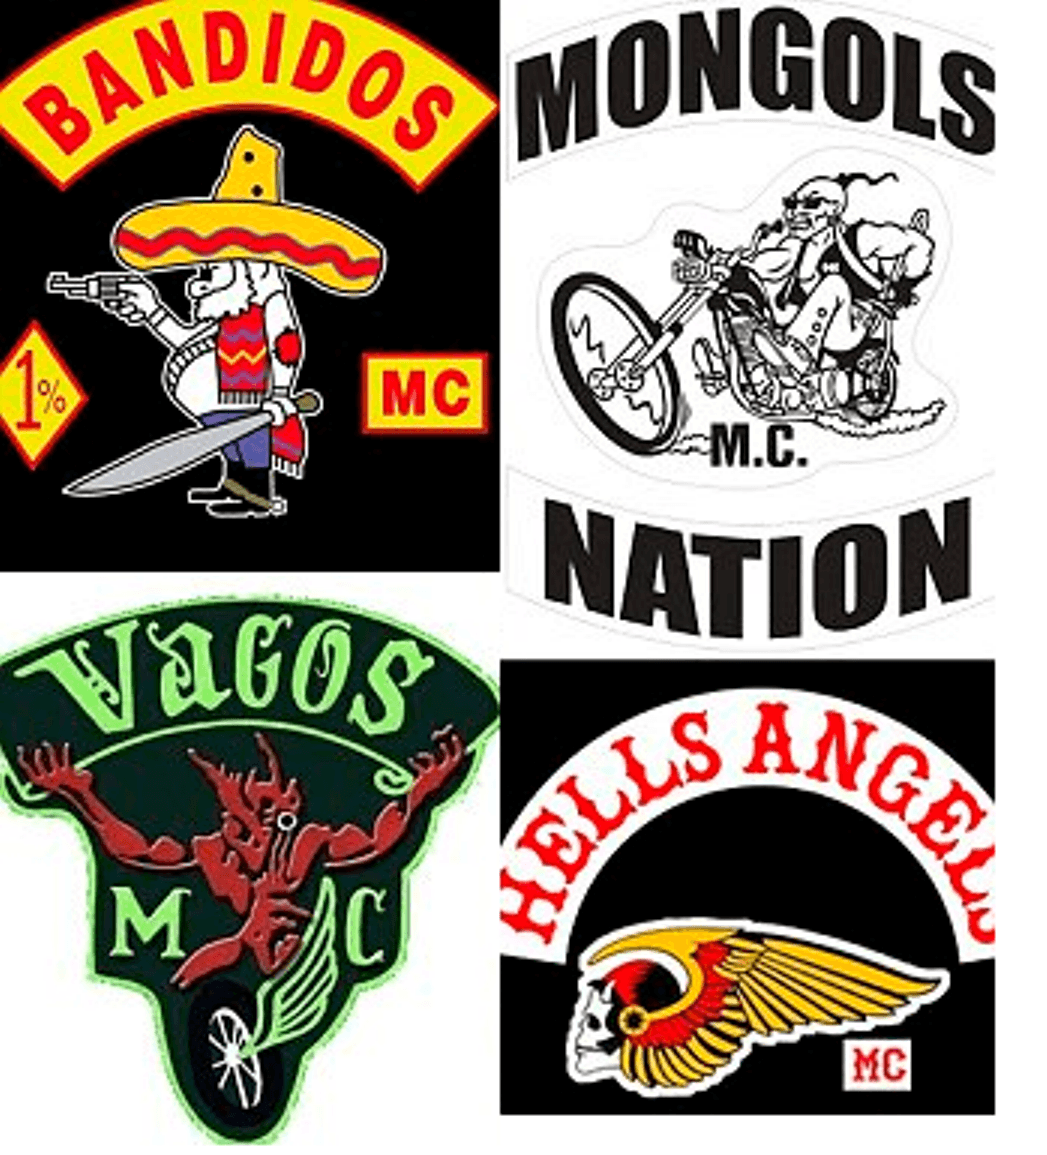 Motorcycle Gang Logo - Feds Go After Violent Motorcycle Gangs by Claiming Rights to Their